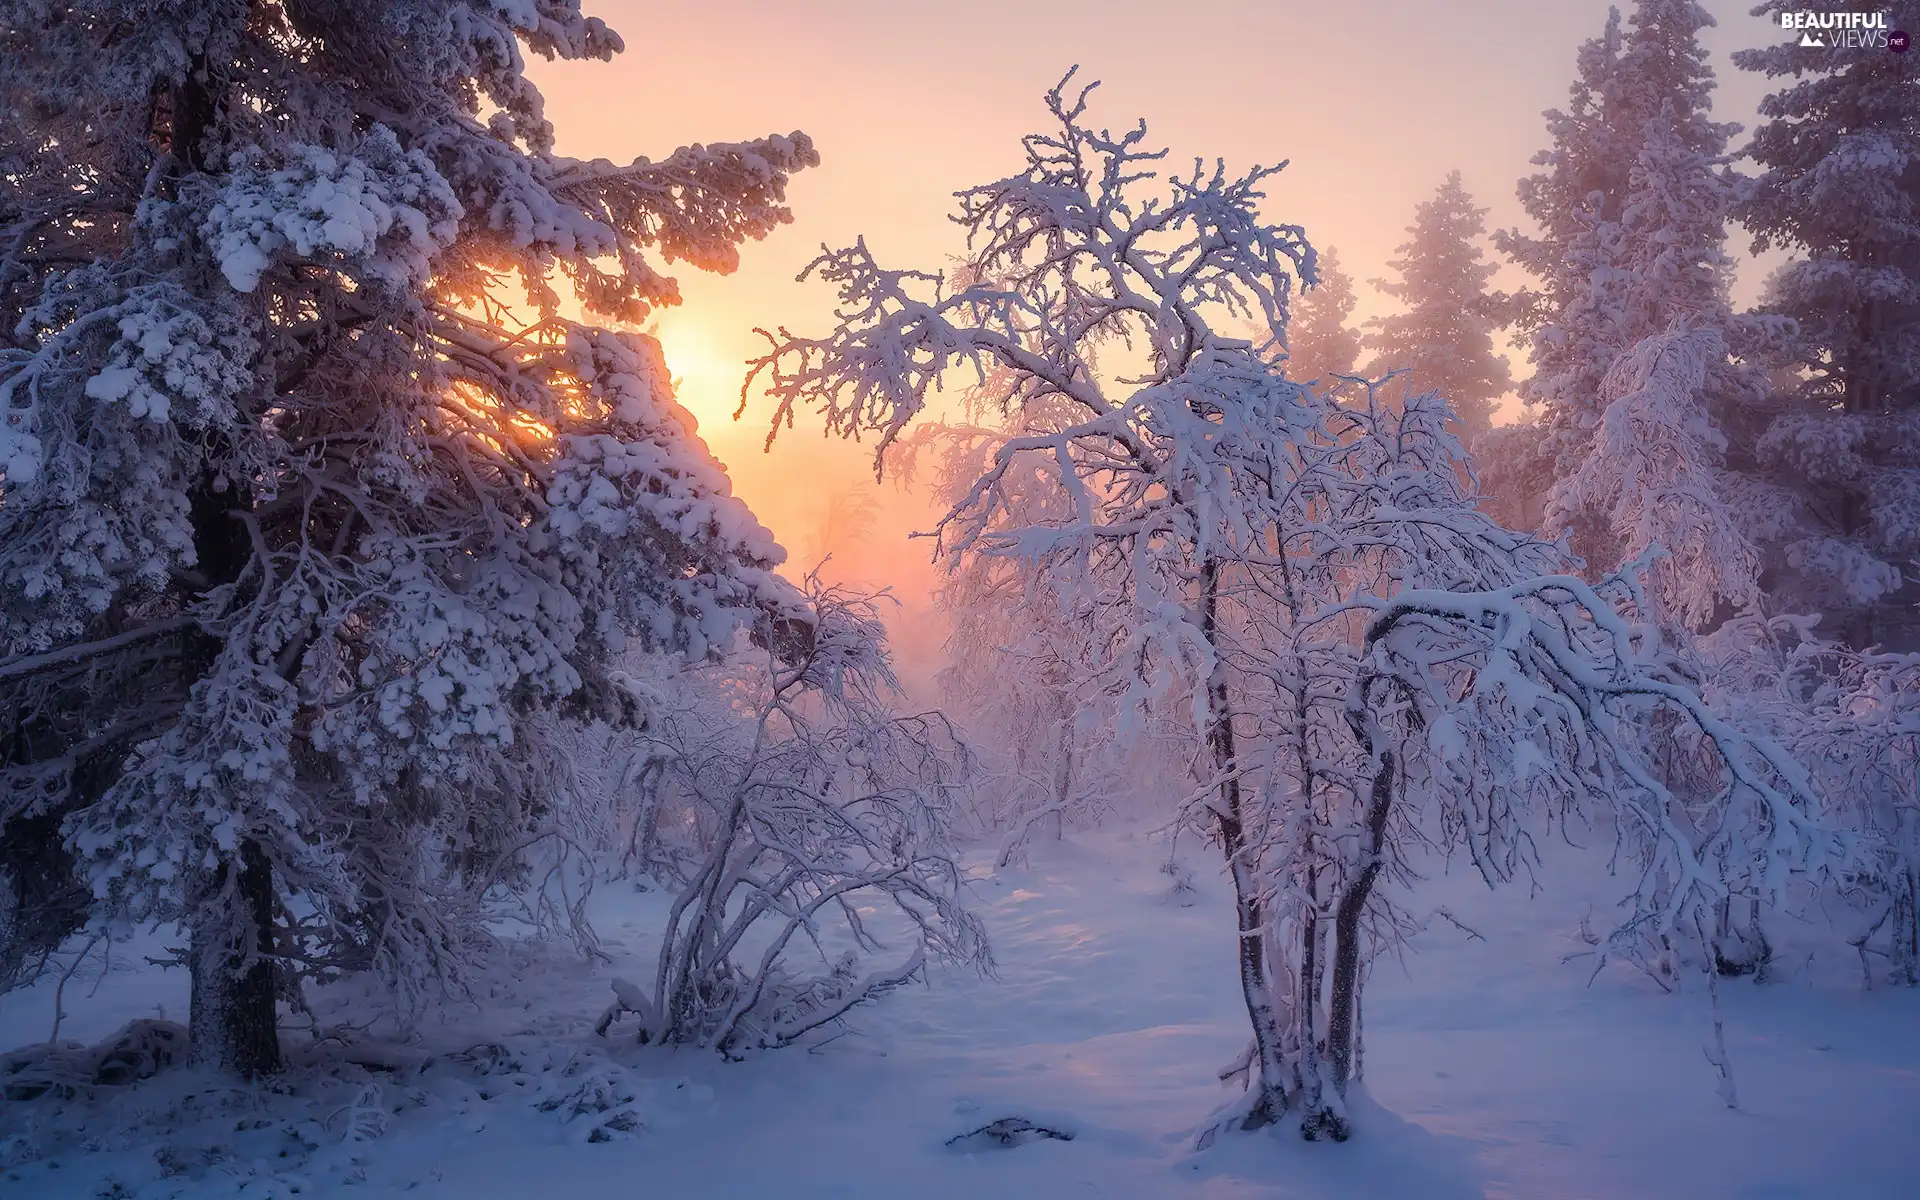 viewes, light breaking through sky, snow, trees, winter